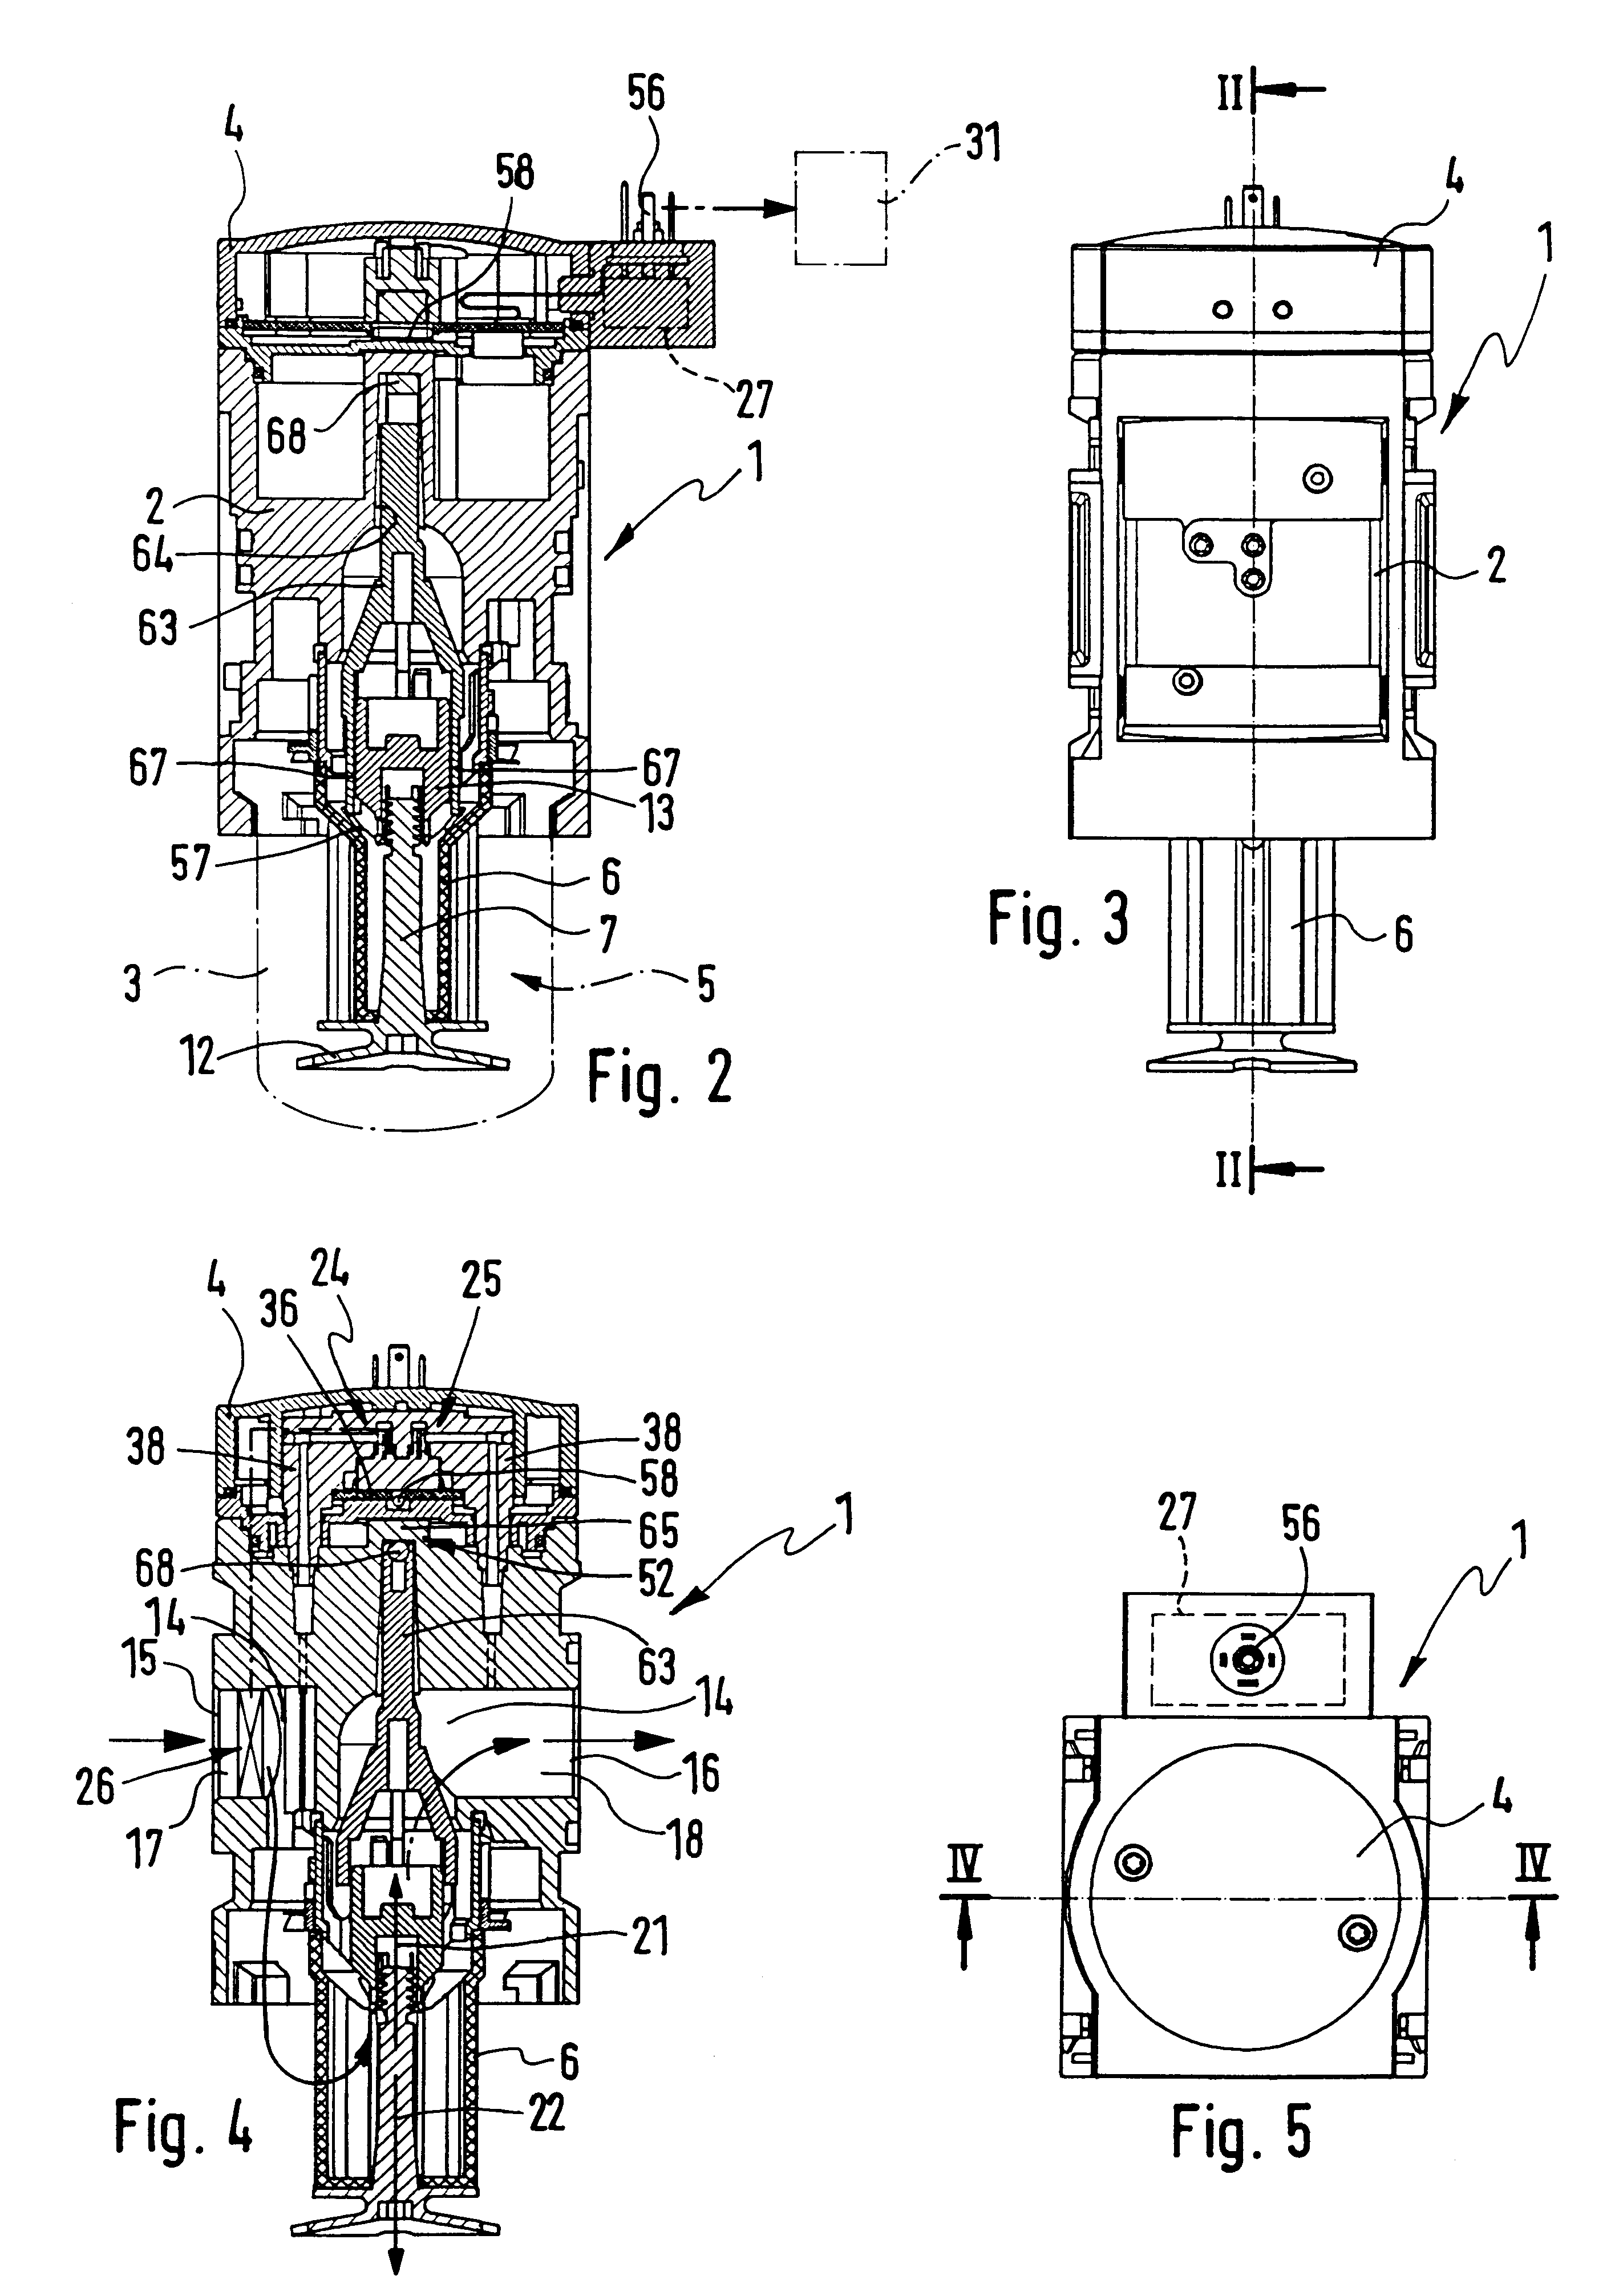 Filtering apparatus for filtering compressed air